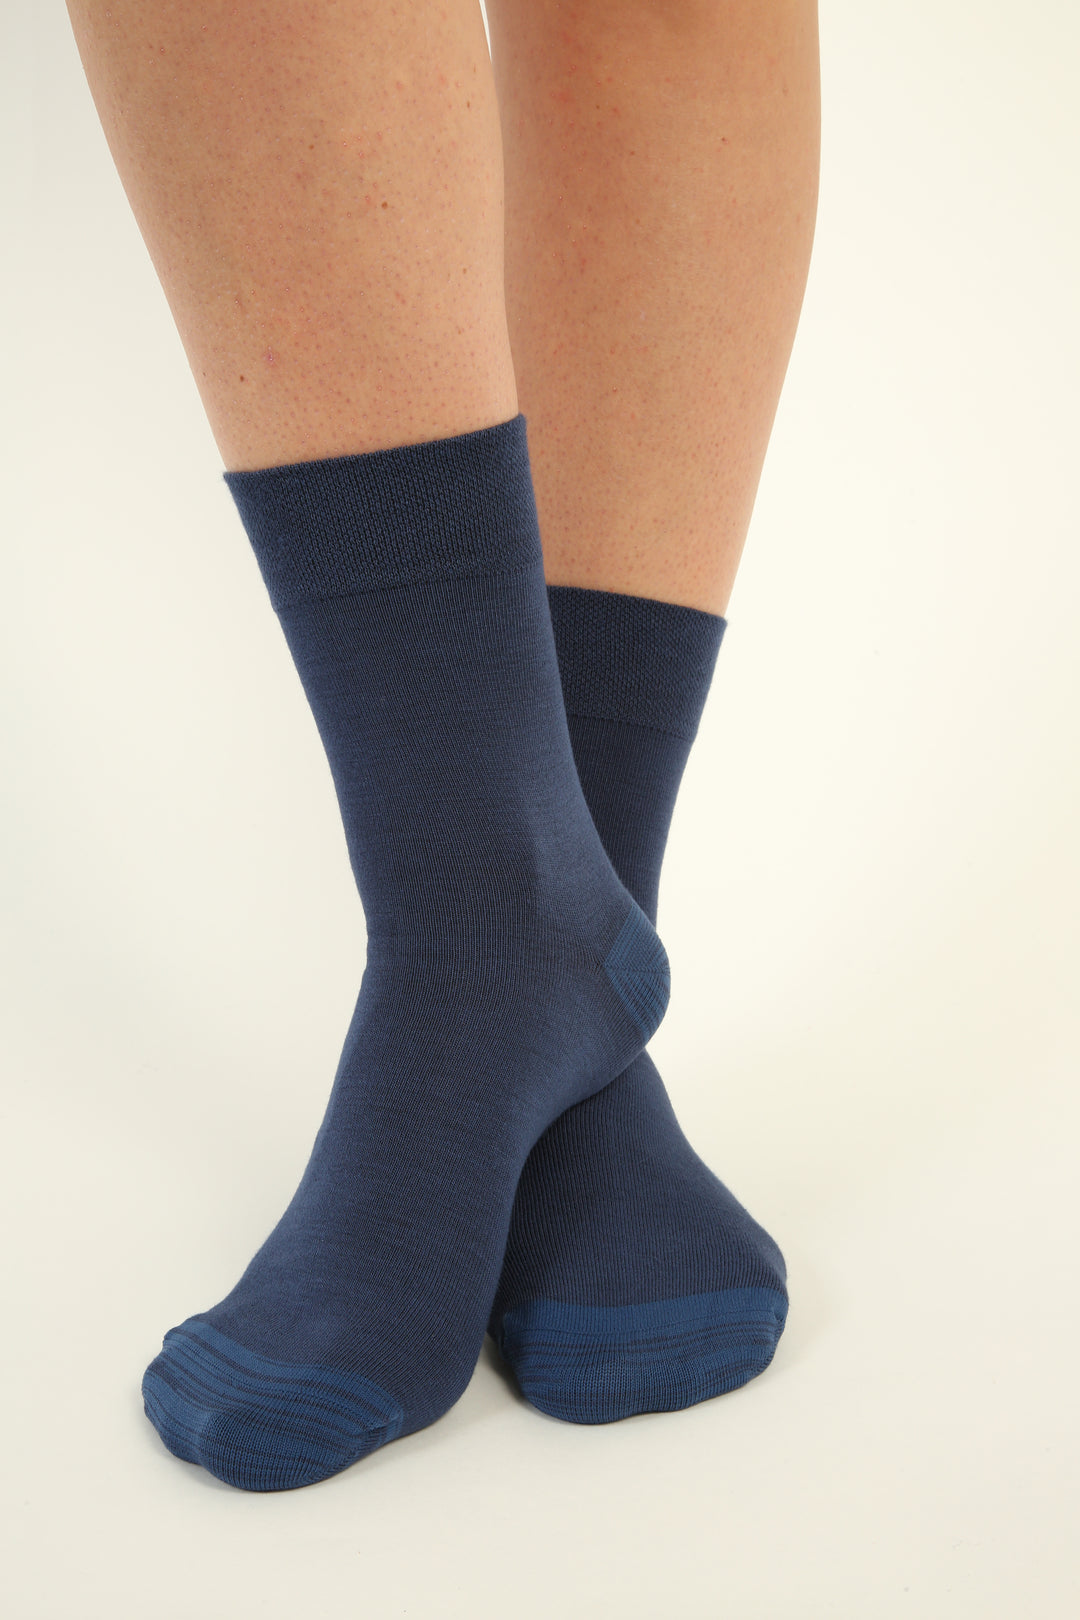 Seamless Bamboo Socks - Jeans color - 6 pairs